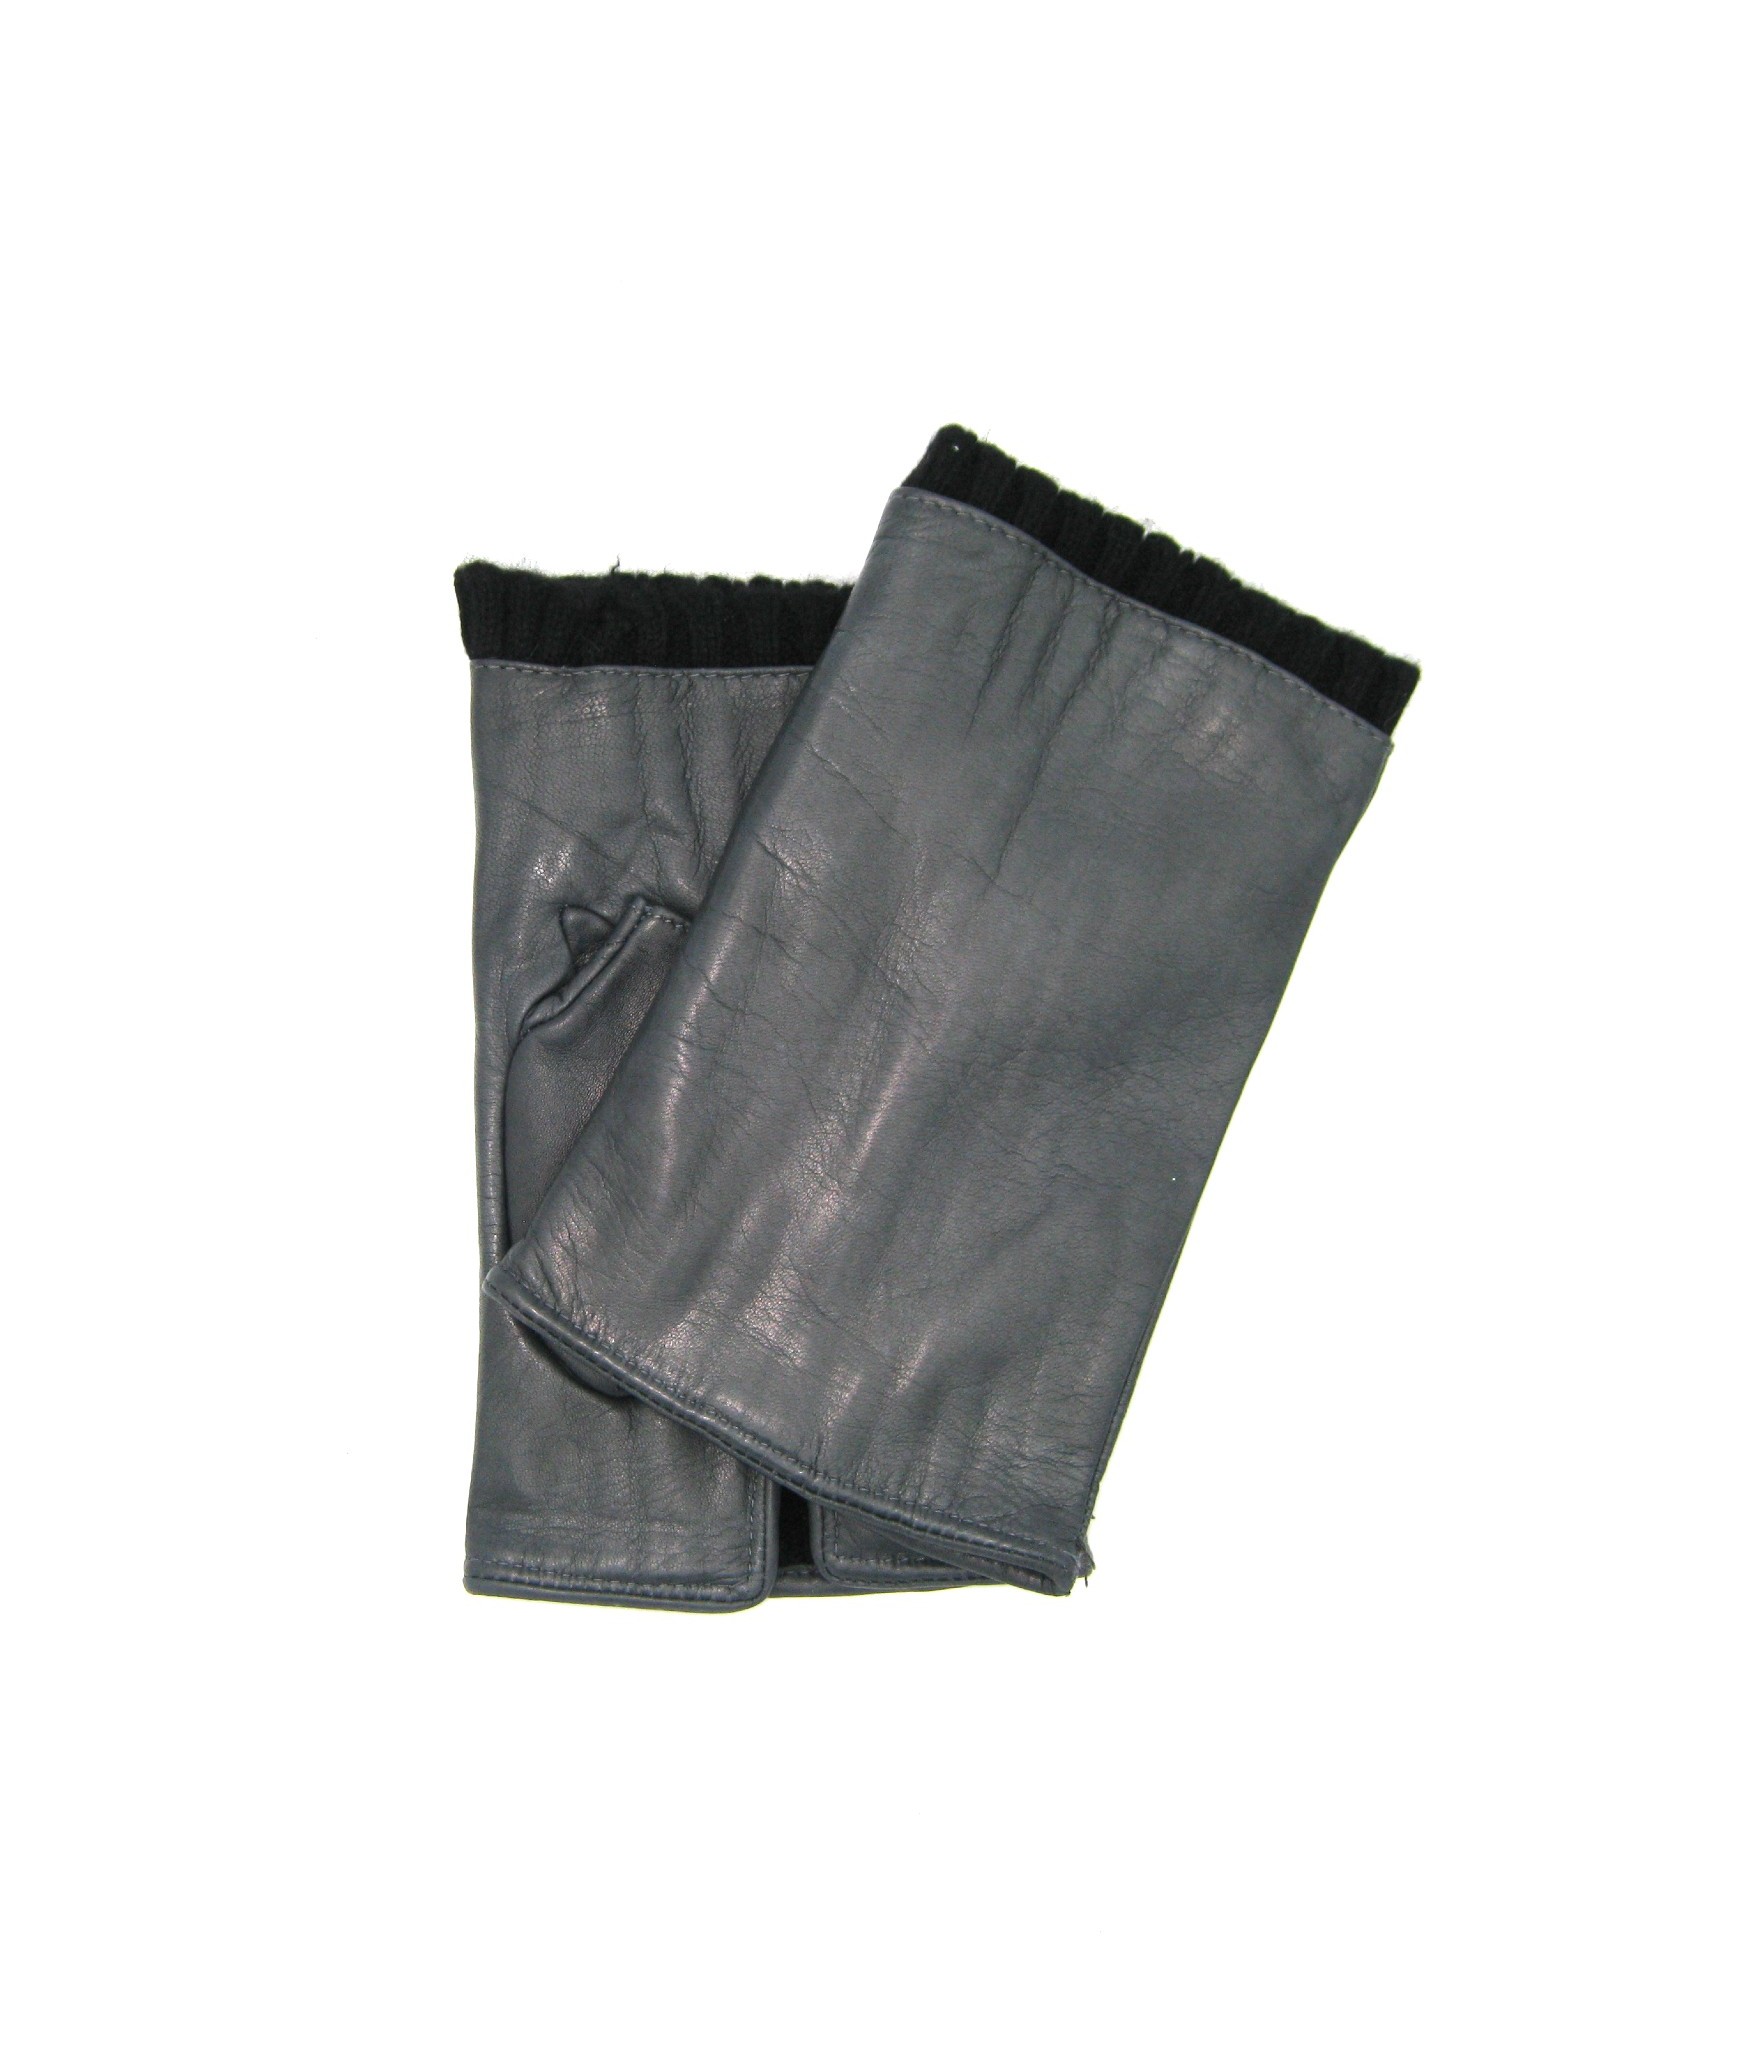 Home Uomo Half Mitten in Nappa leather cashmere lined Grey